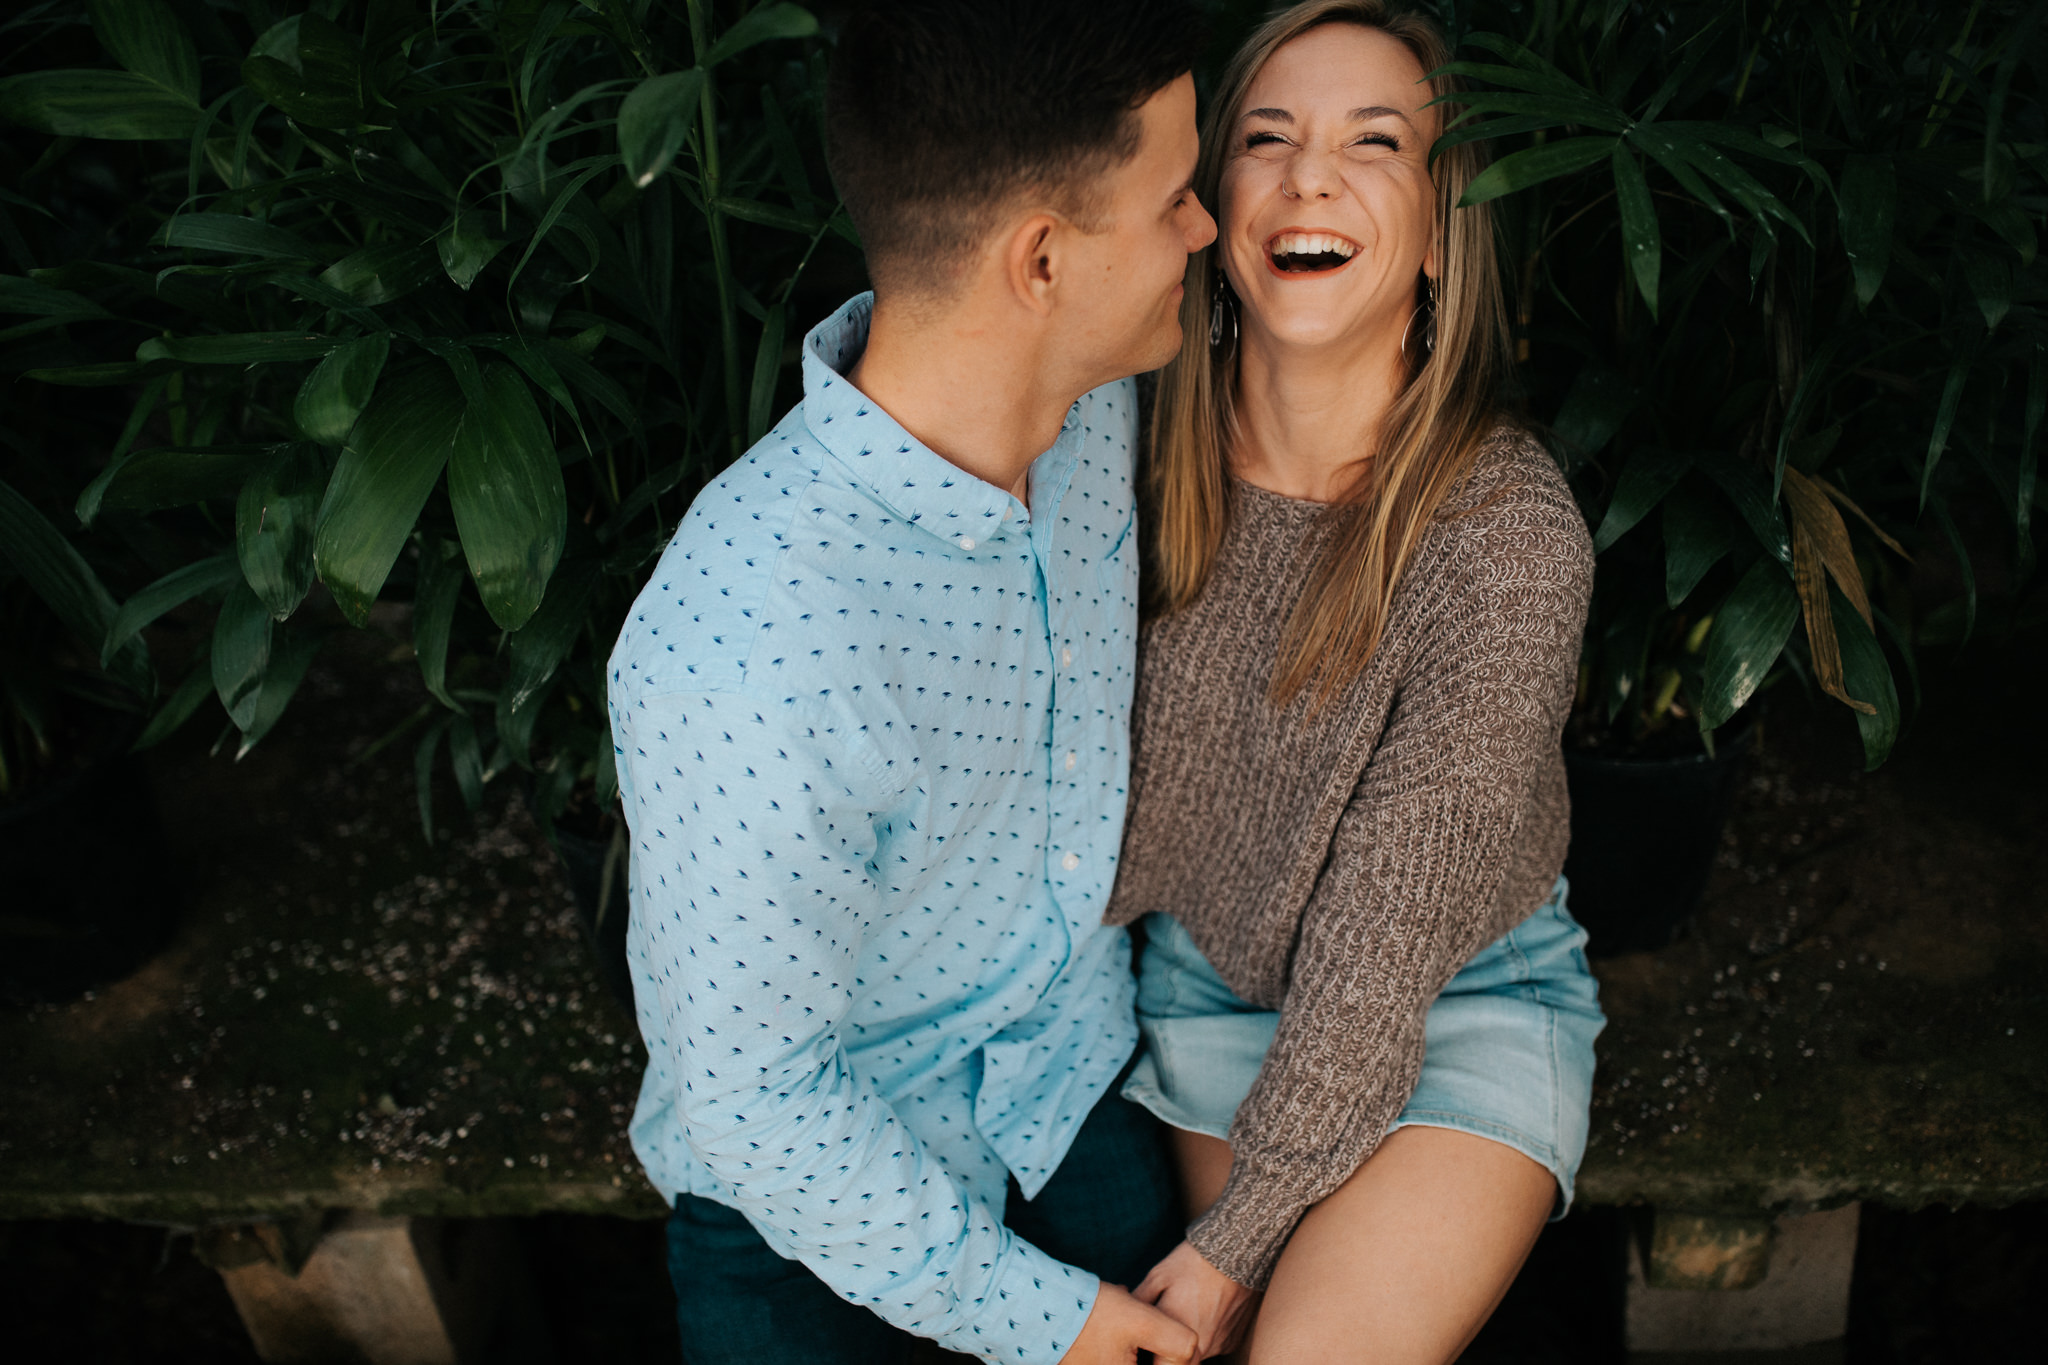 memphis-engagement-photographer-thewarmtharoundyou-greenhouse-engagement-pictures (12 of 118).jpg